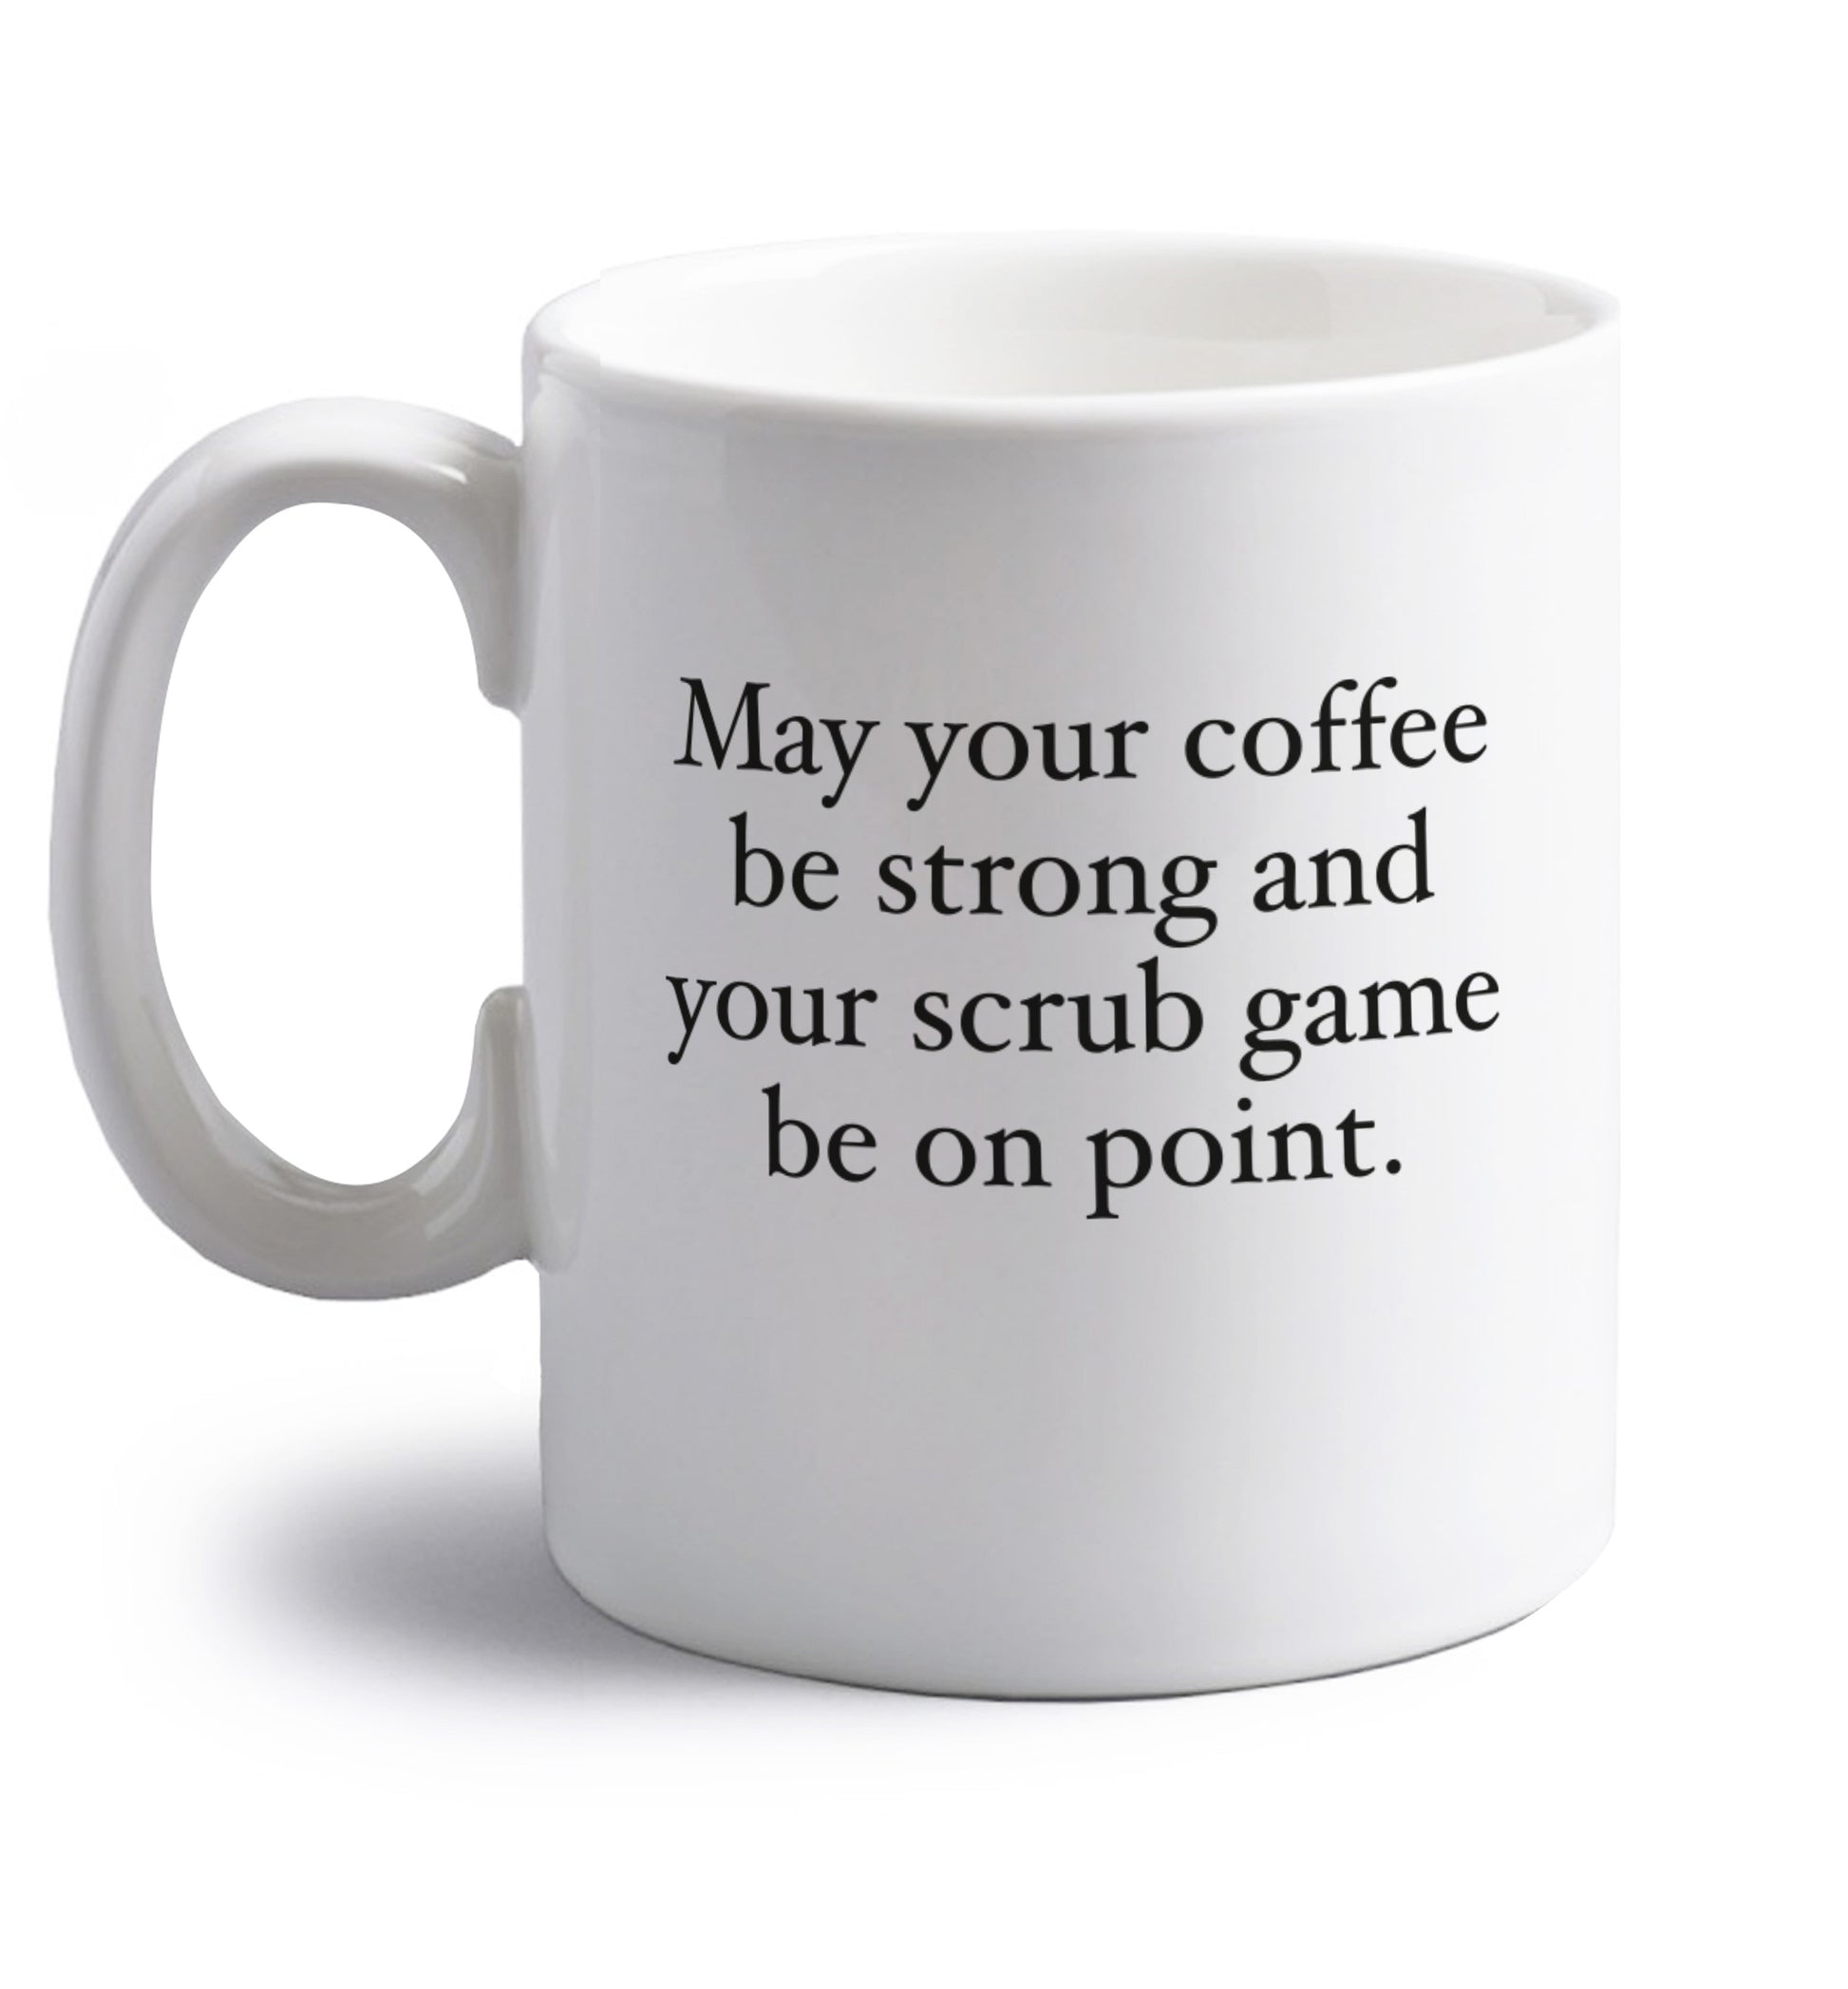 May your caffeine be strong and your scrub game be on point right handed white ceramic mug 